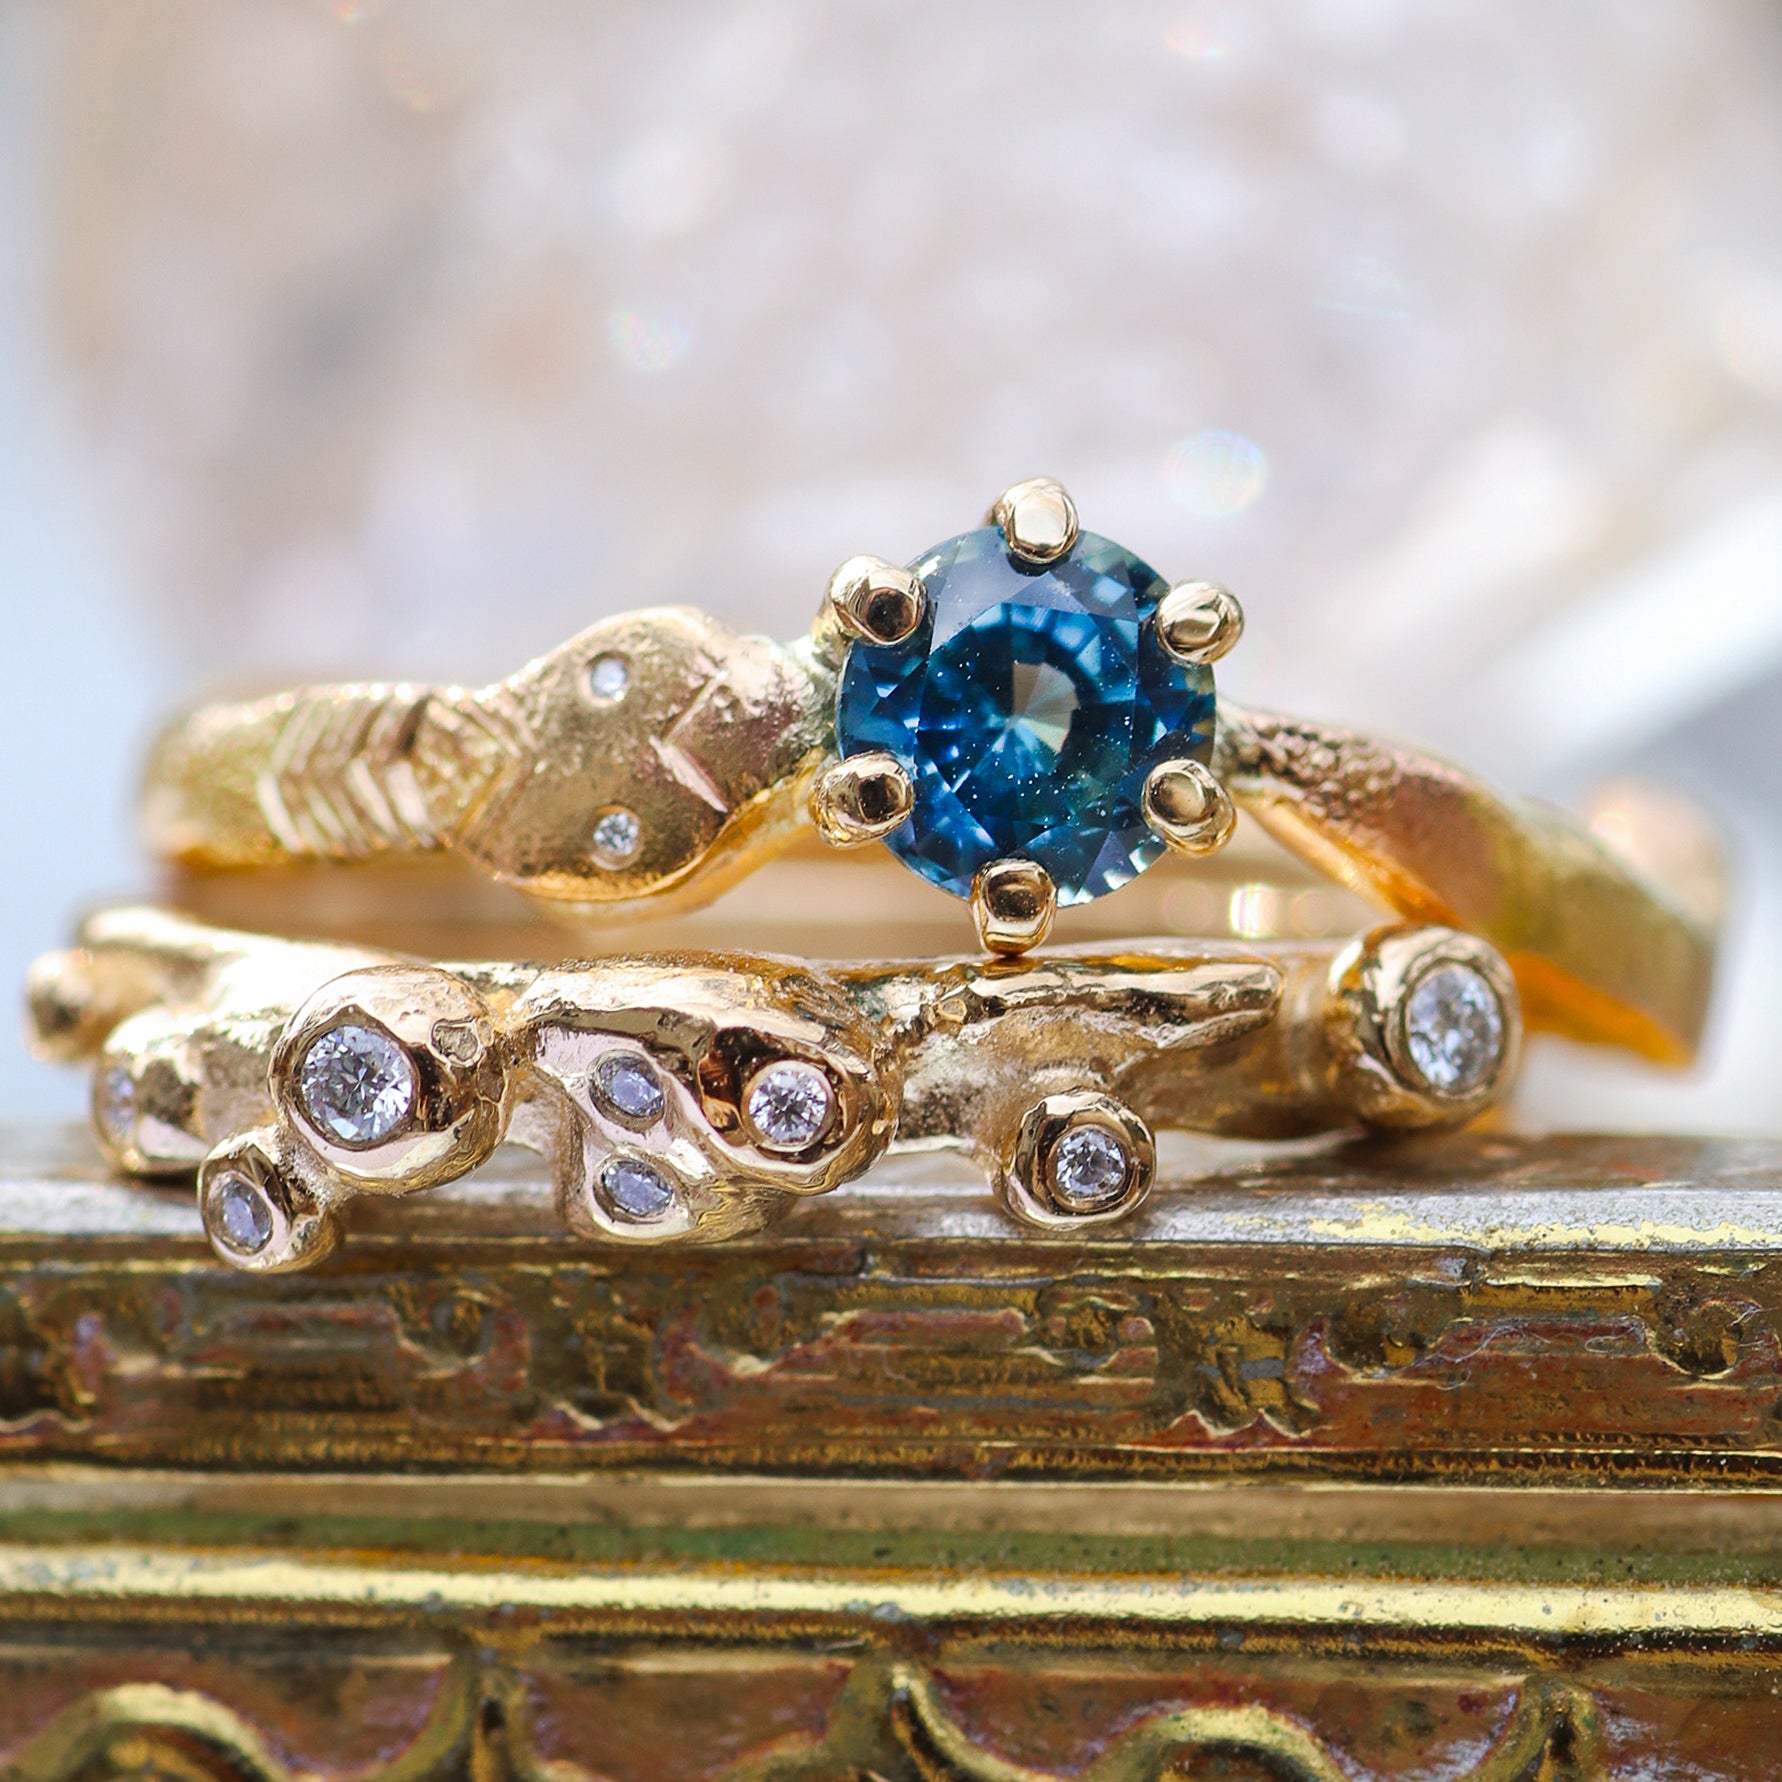 14K yellow gold parti/teal sapphire snake ring (one of a kind)